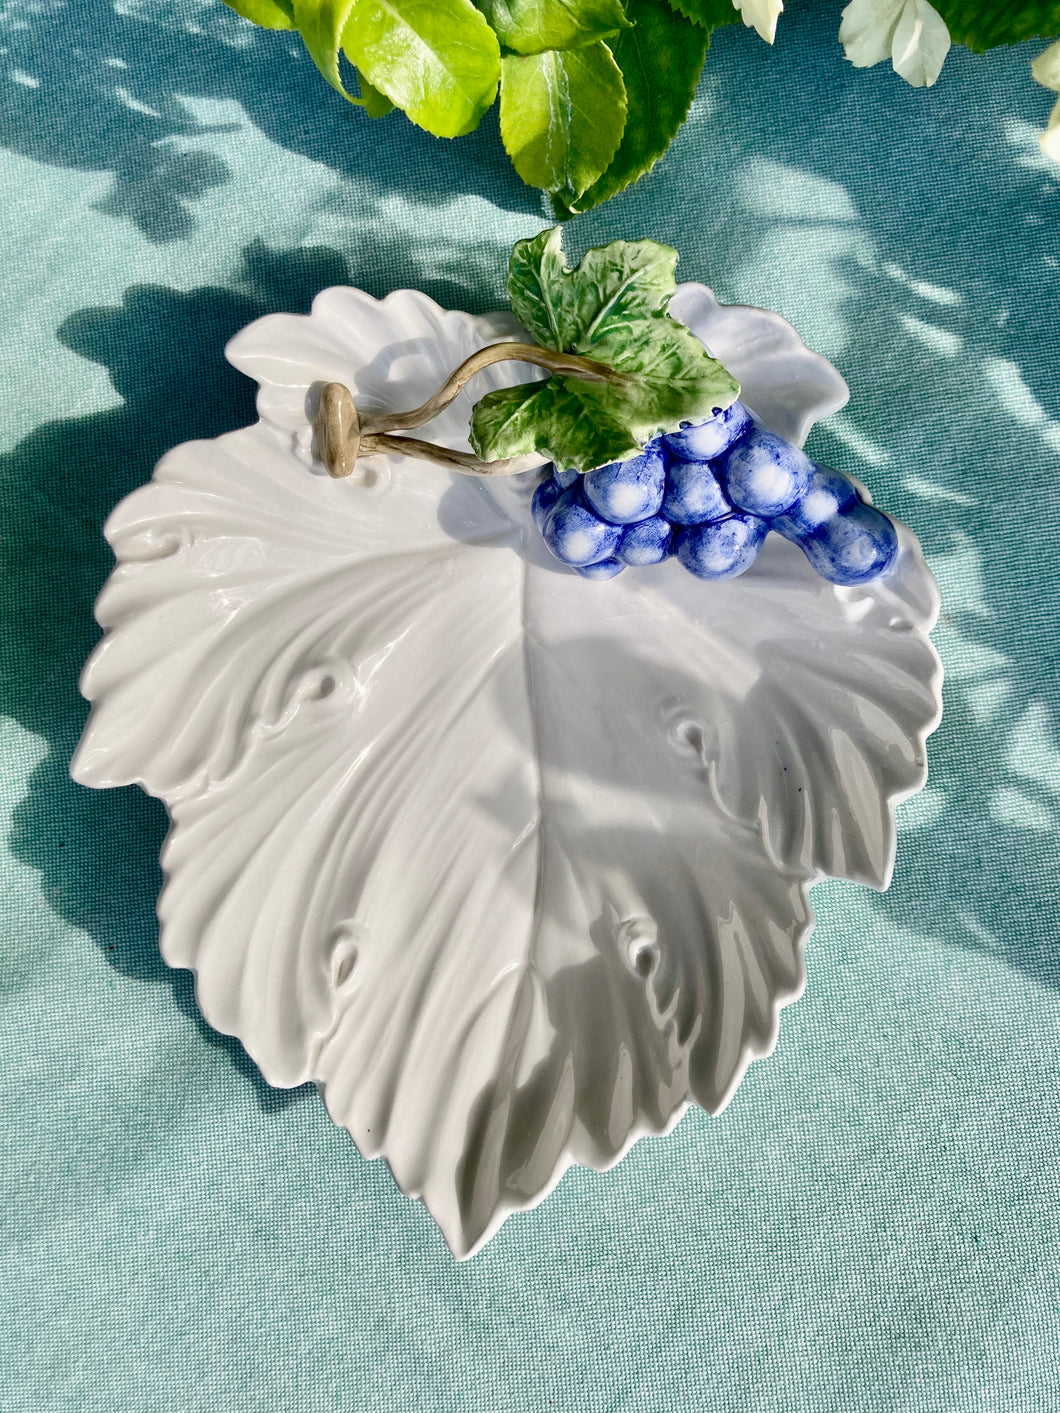 Small white vine leaf Italian dish with grapes